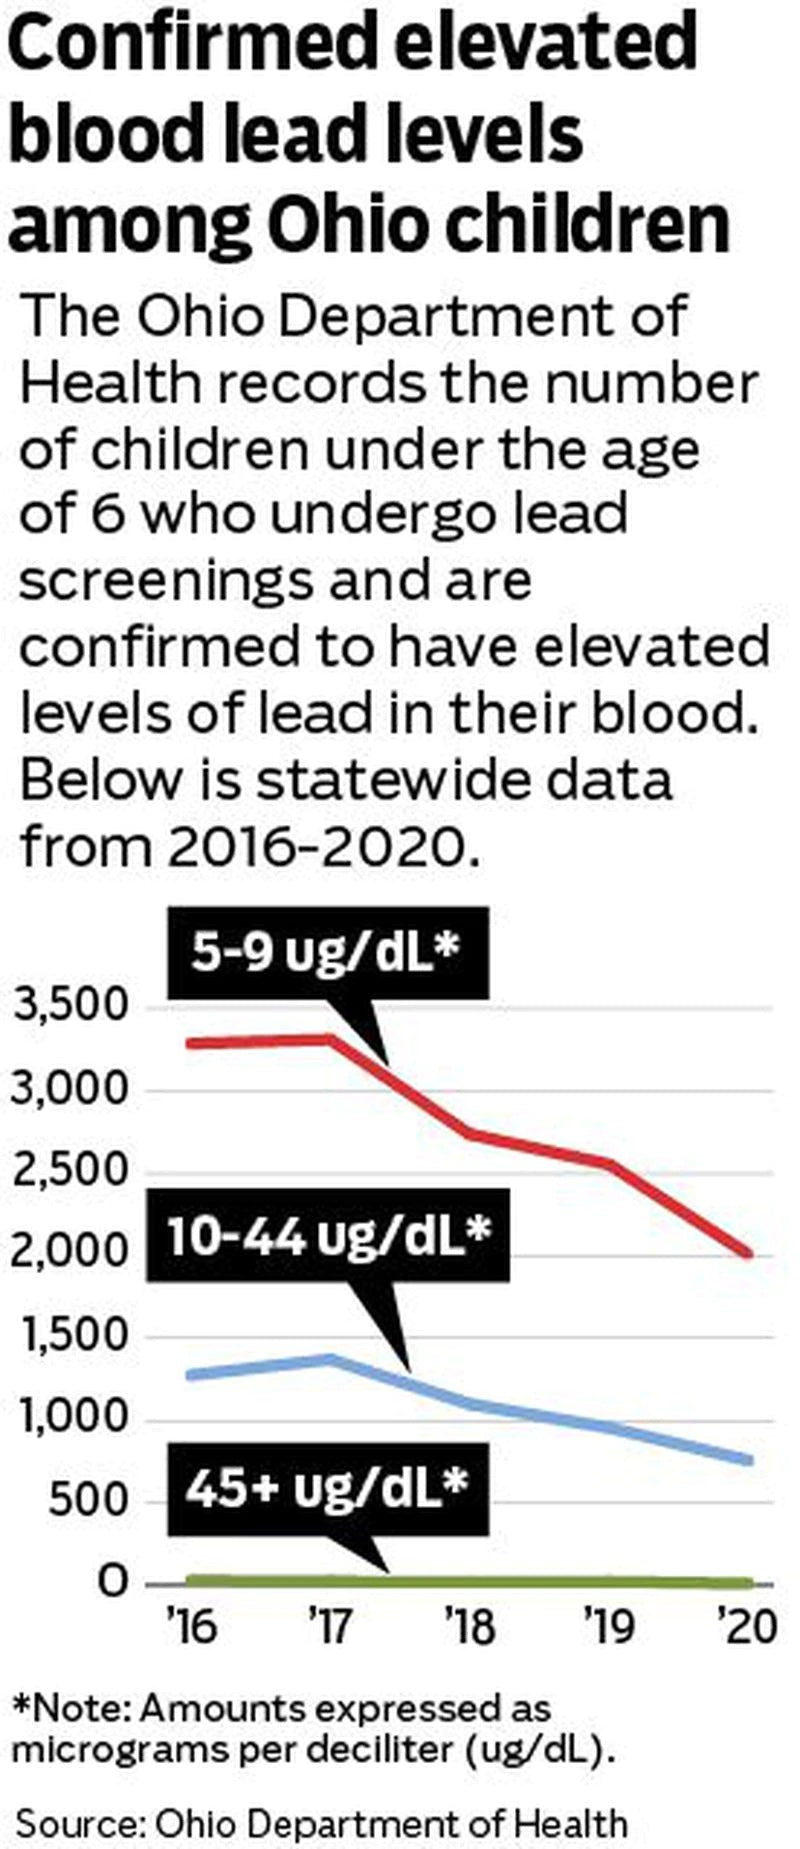 Ohio children found to outpace nation in elevated blood lead level